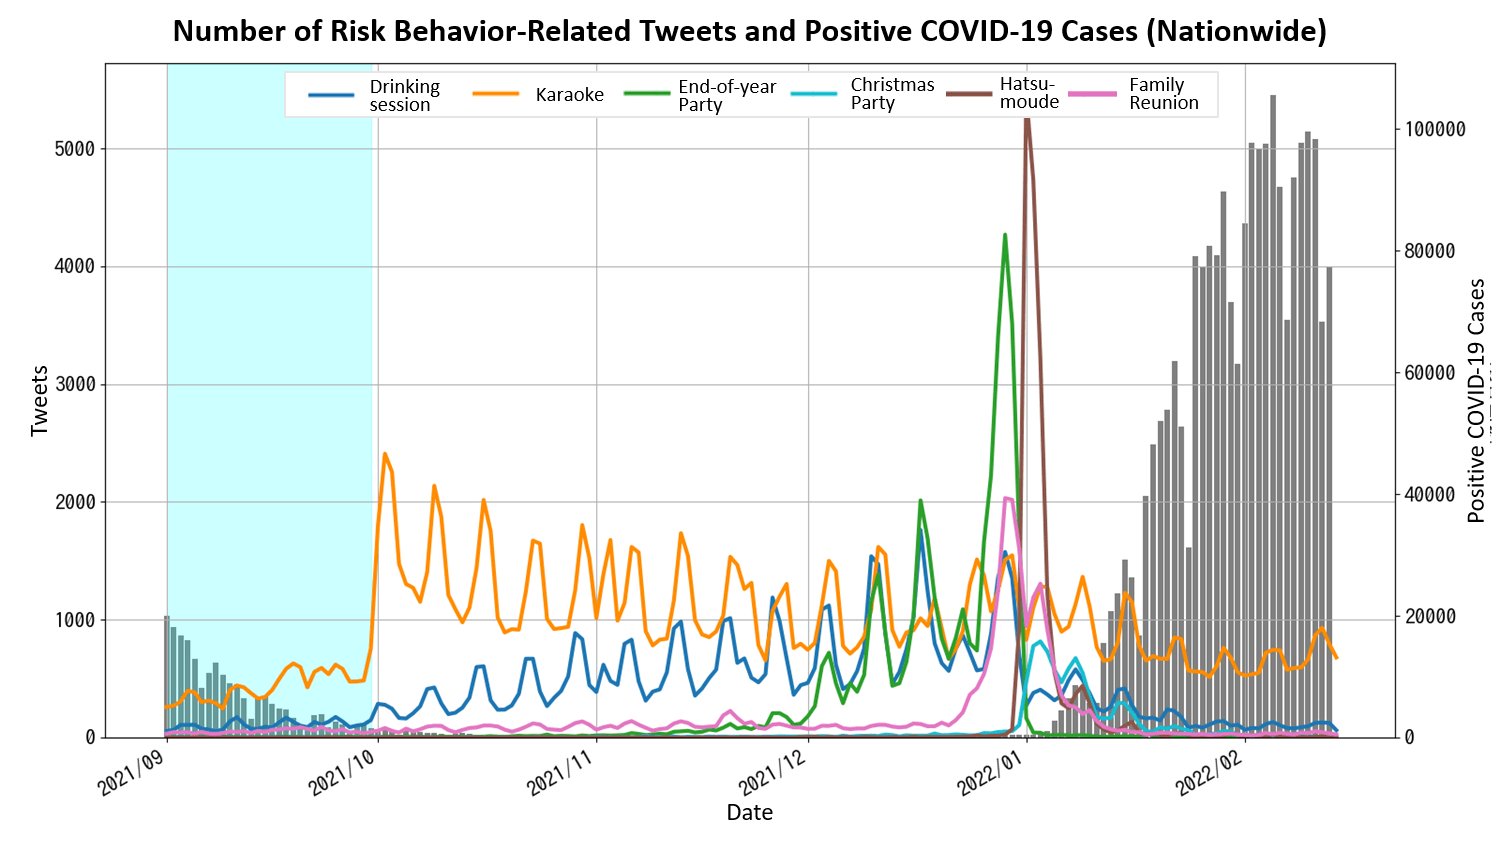 Number of Risk Behavior-Related Tweets snd Positive COVID-19 Cases